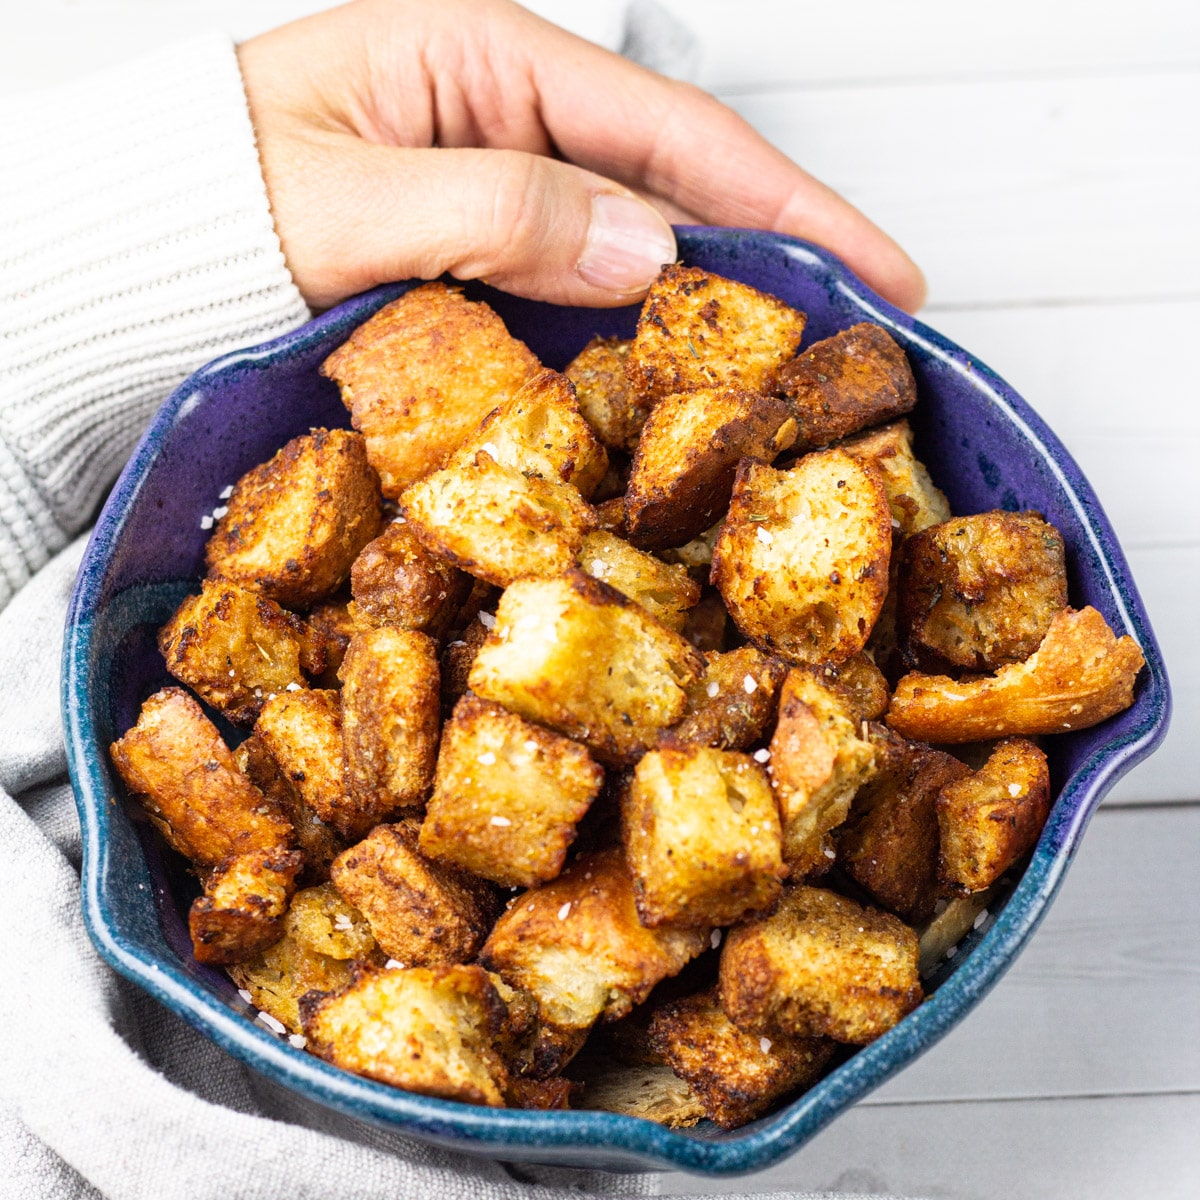 croutons in bowl with hand.